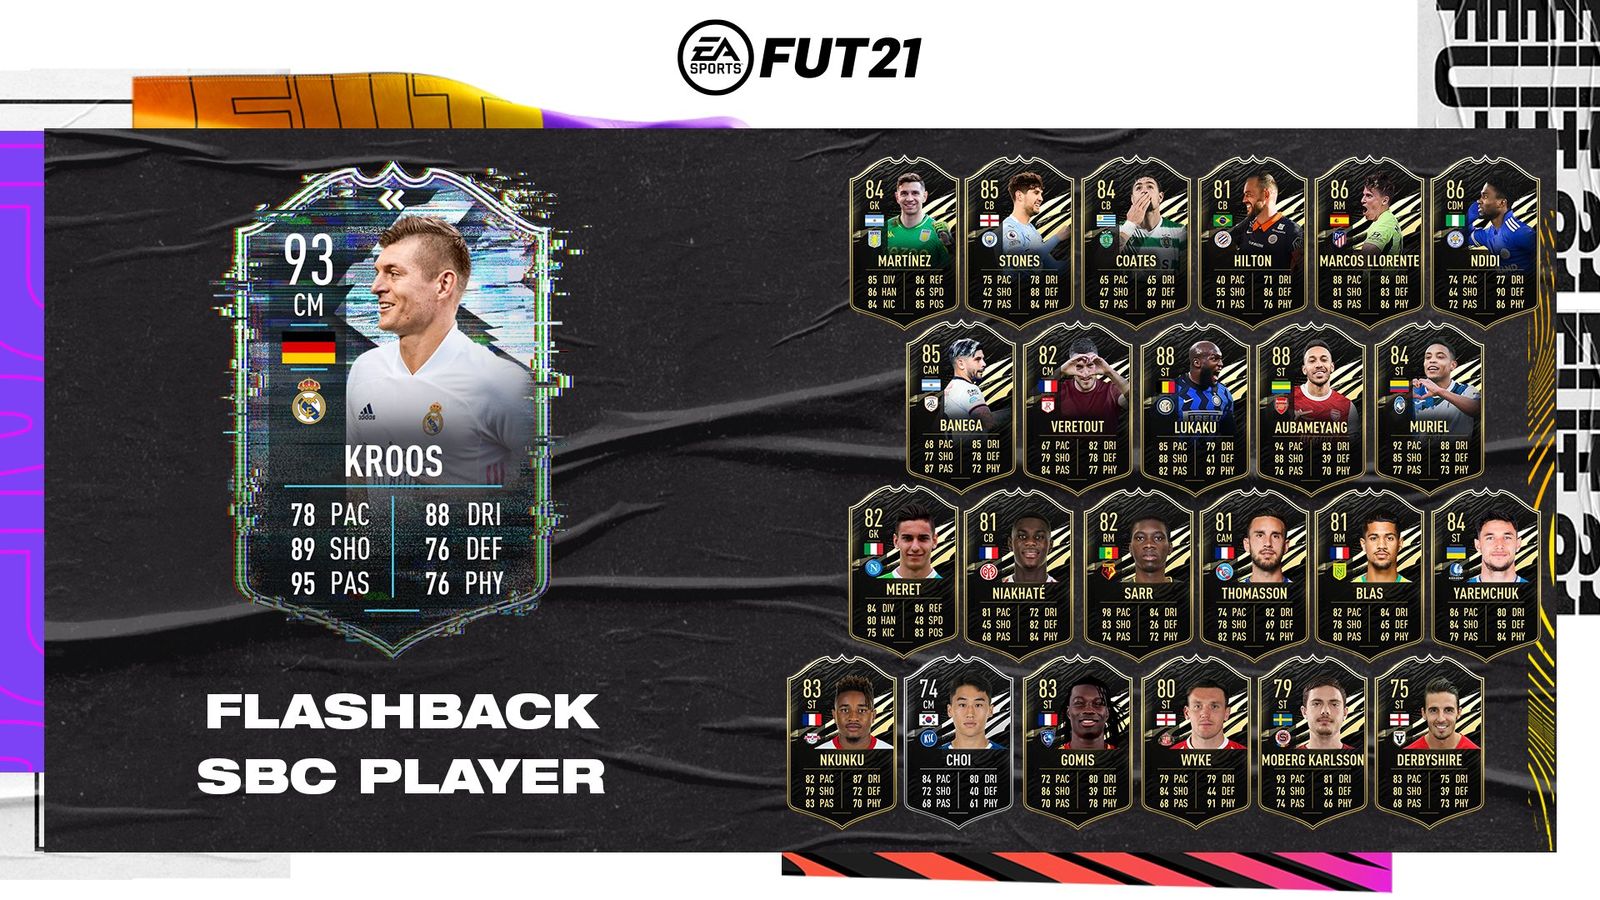 WORTH THE WAIT - Flashback Kroos has finally arrived